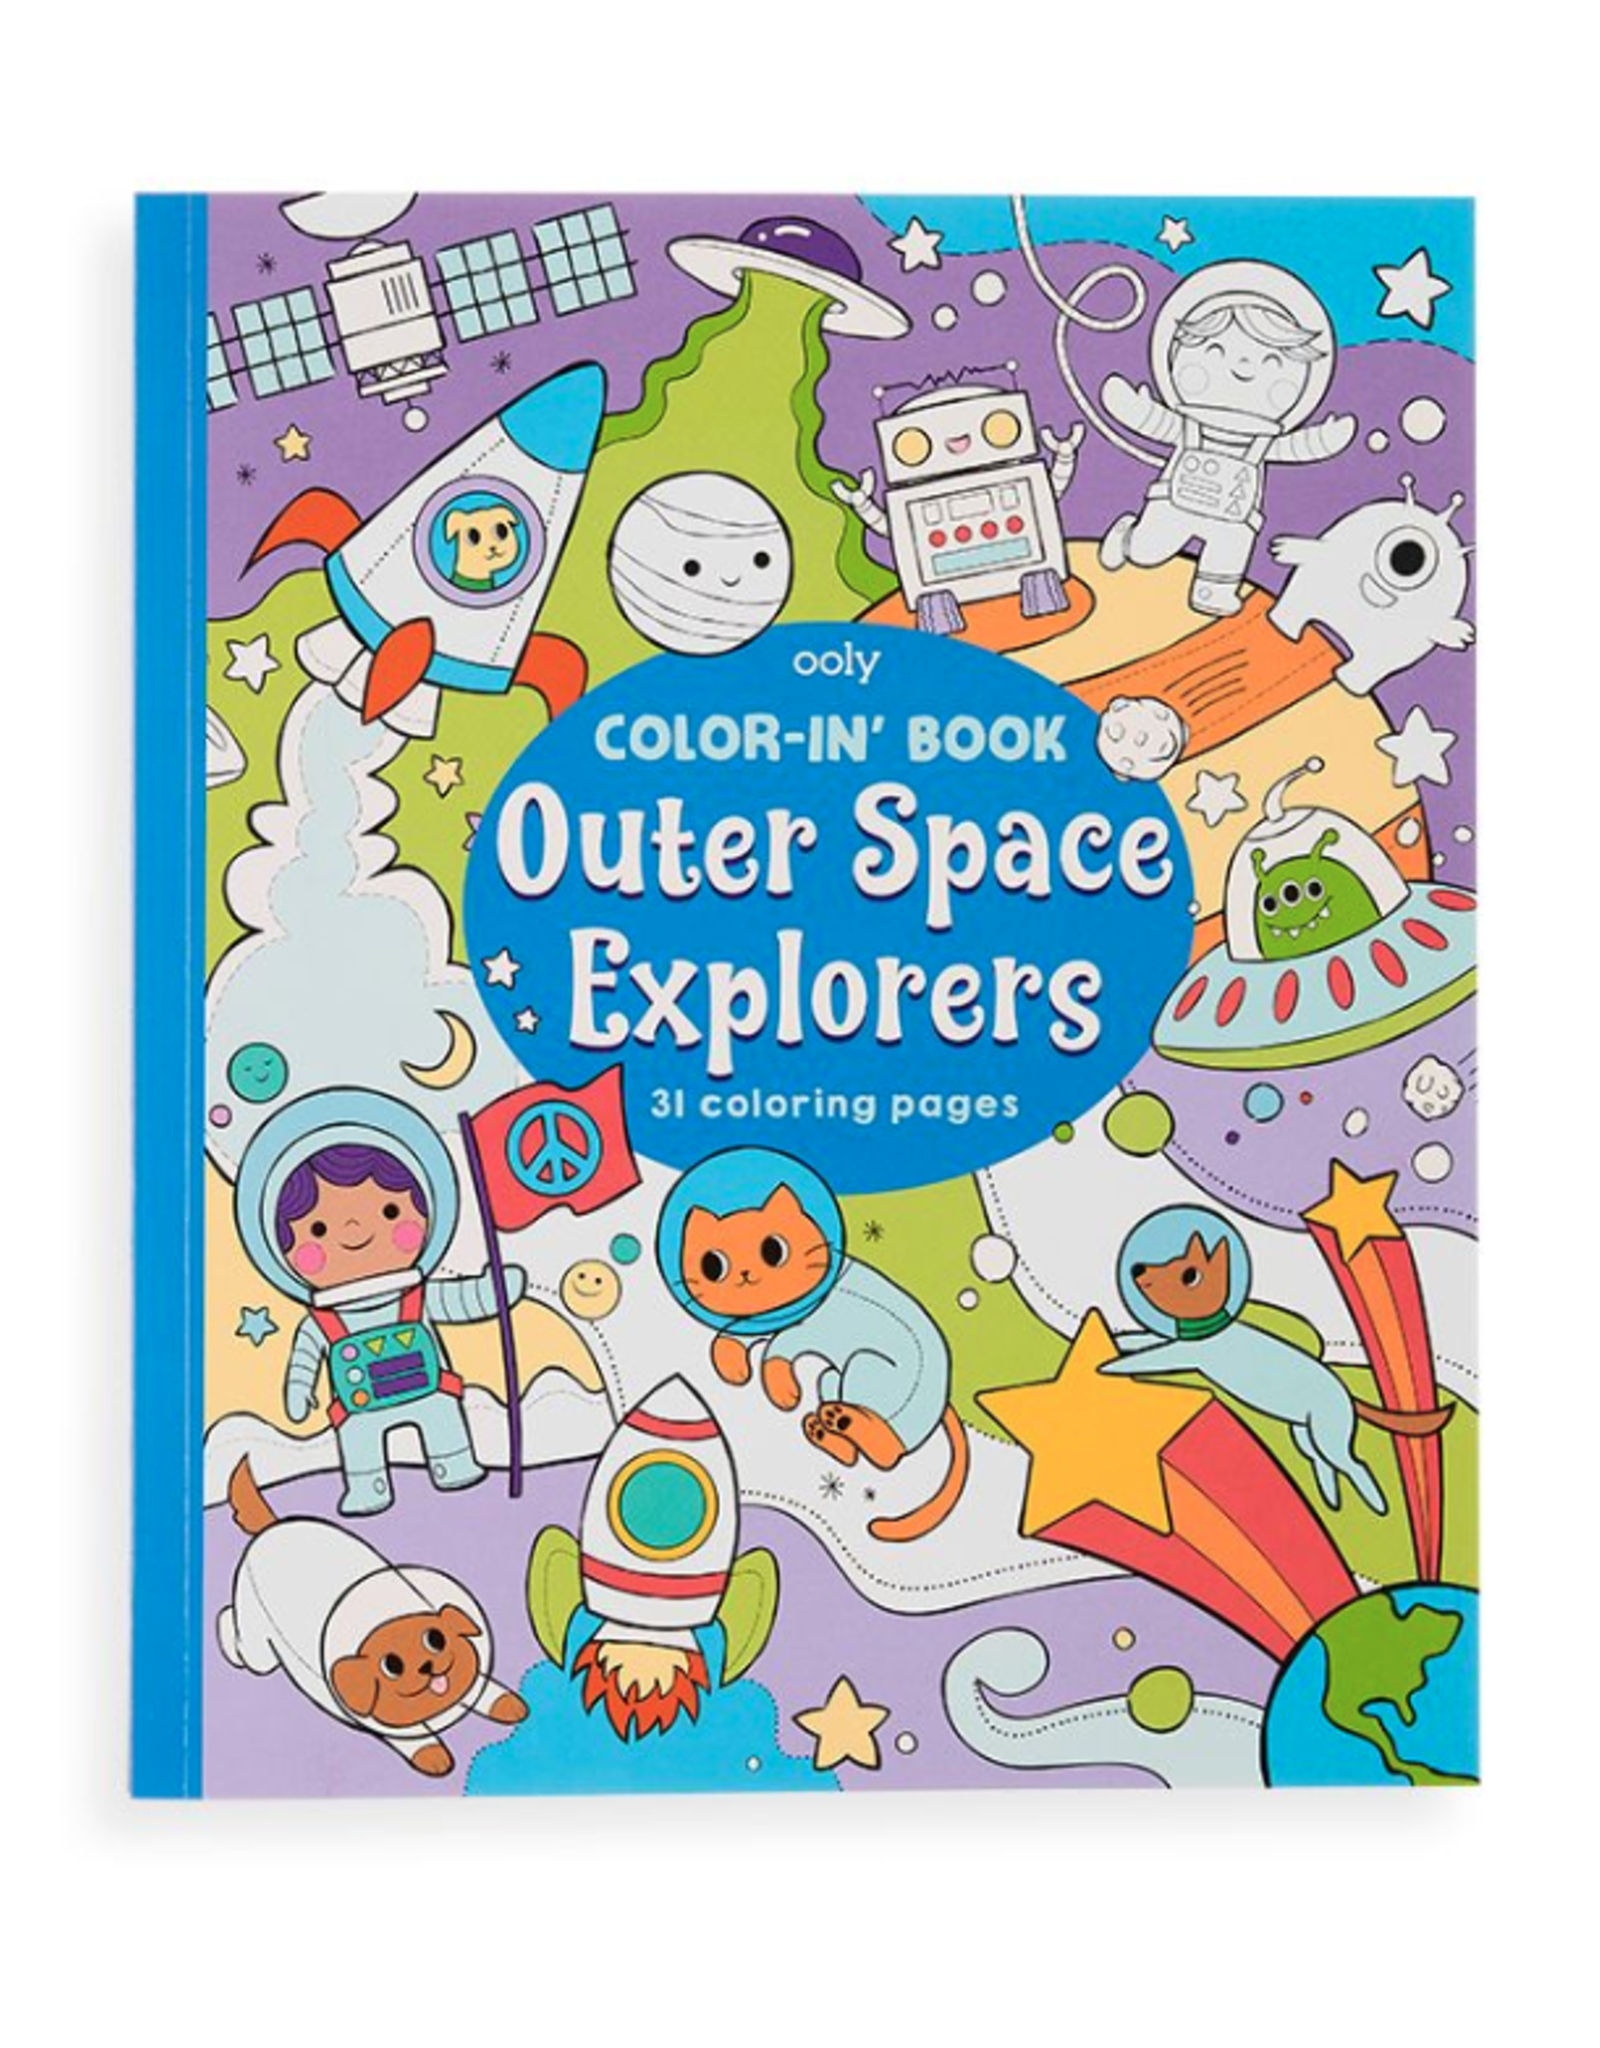 ooly Color-in' Book: Outer Space Explorers